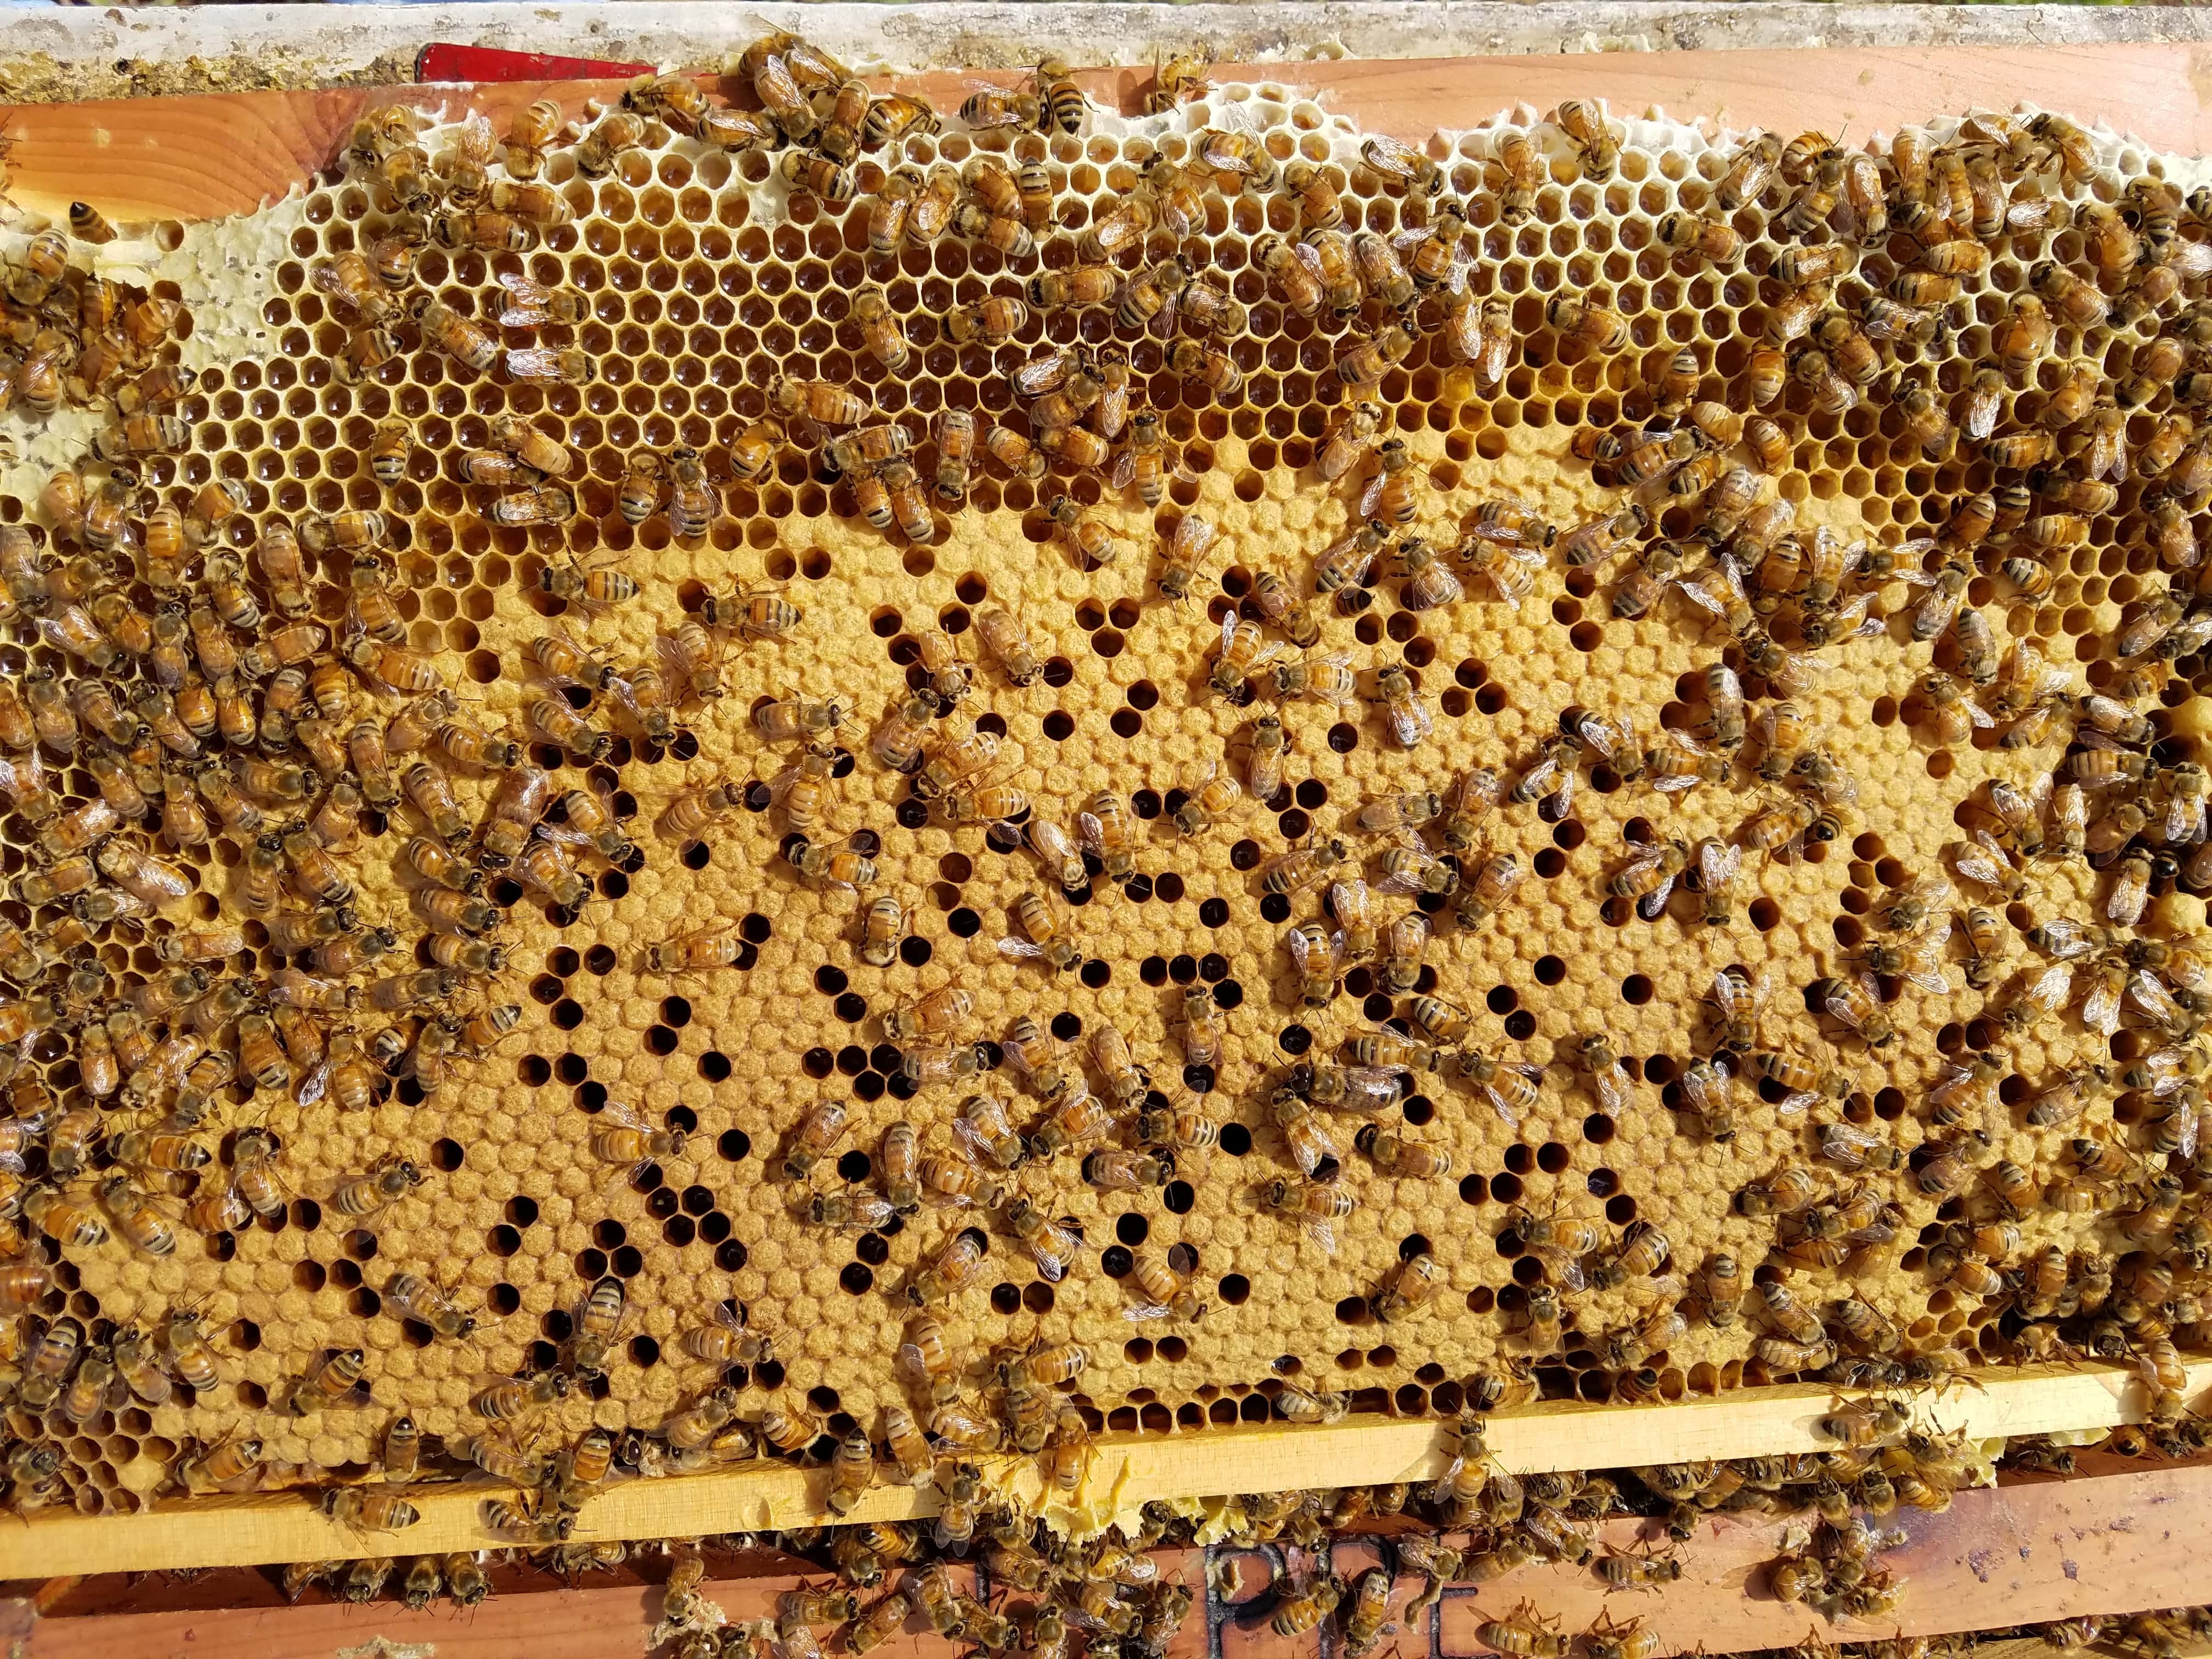 Queen Bees for sale Iowa - Lappe's Bee Supply and Honey Farm LLC